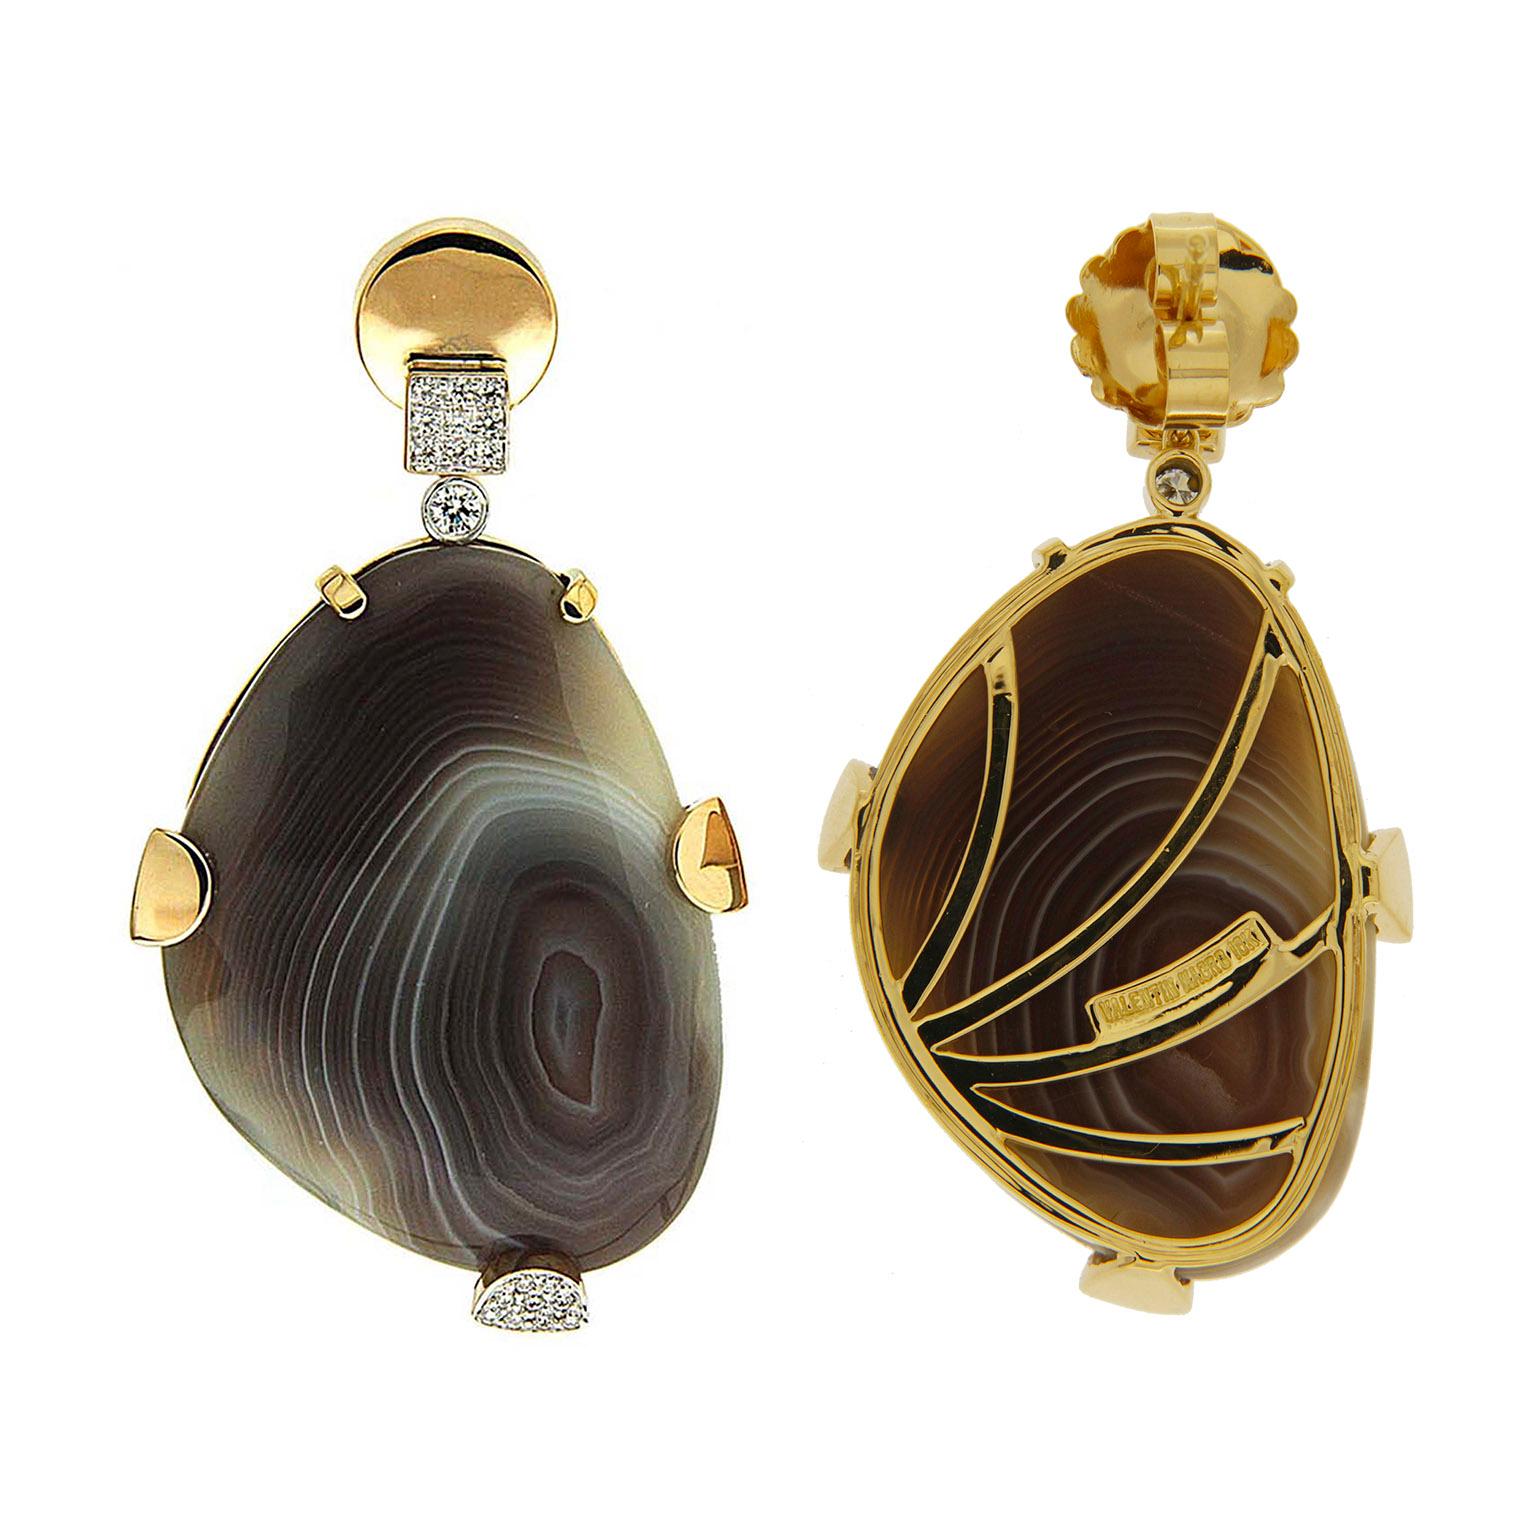 Valentin Magro Botswana Agate Diamond Drop Earrings bring light to shadow. Its showpiece is special-cut Botswana agate, with white rings in a deep brown background. Round brilliant cut diamonds and 18k yellow gold shapes make lustrous counterpoints